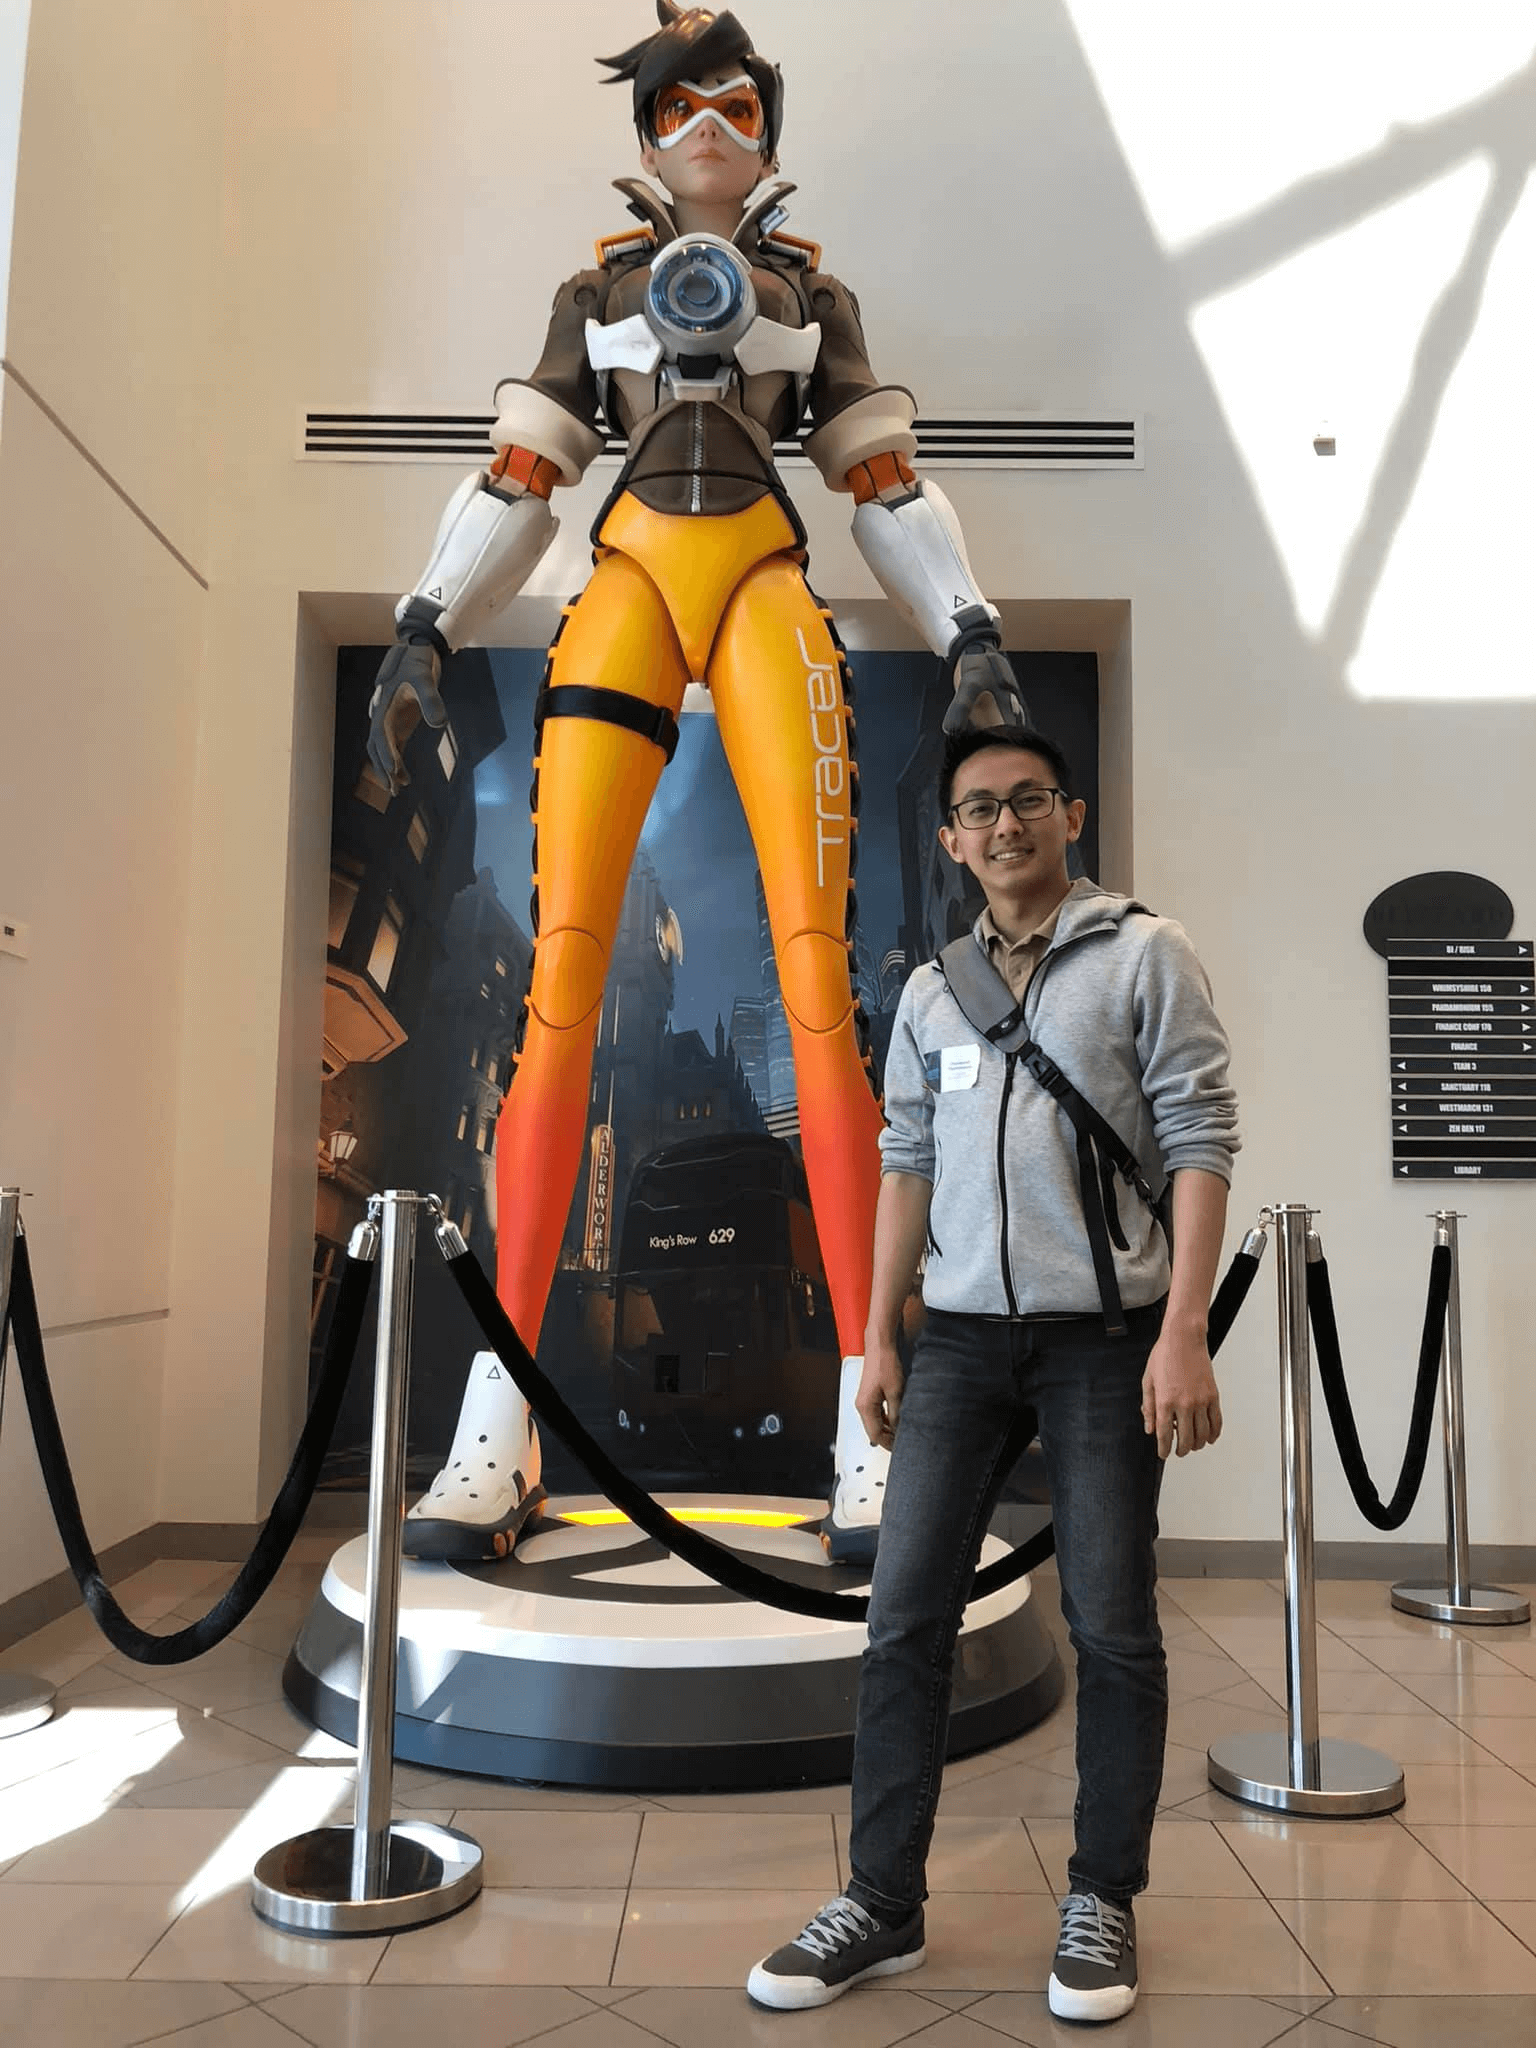 Chonlawat Thammawan stands in front of a towering statue of Tracer from the game Overwatch.